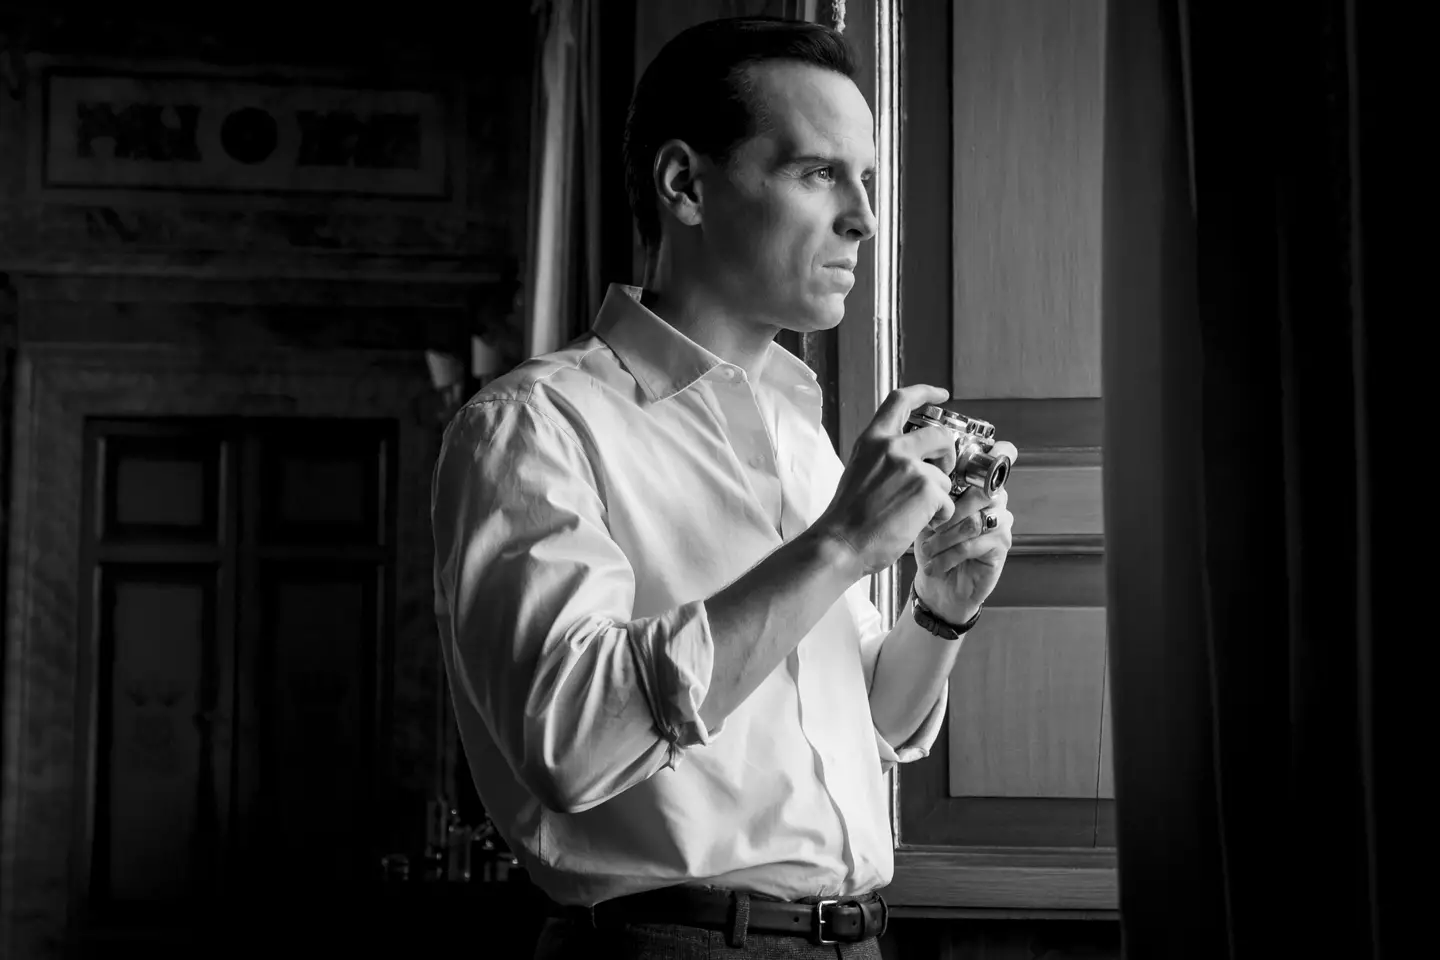 The new image of Andrew Scott as Tom Ripley.